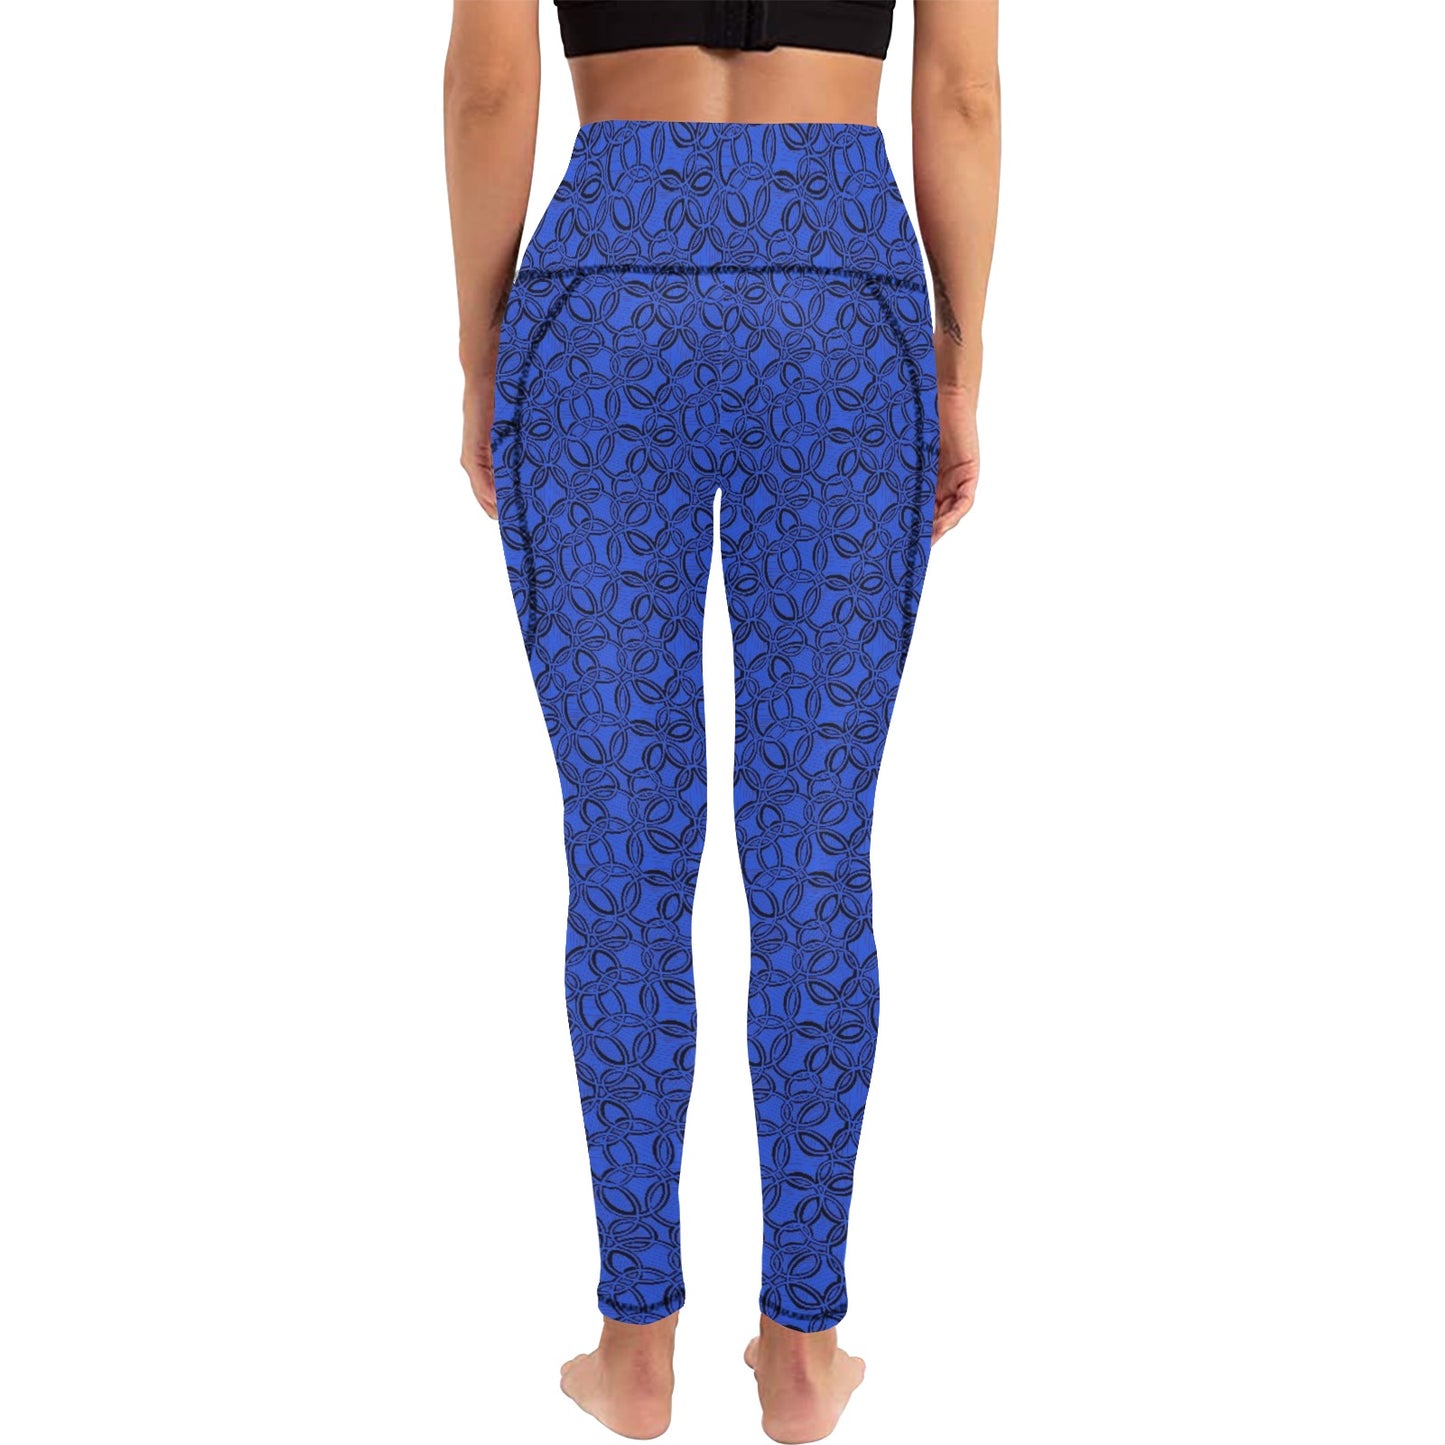 Geometric Blue Leggings with Pockets. Design hand-painted by the Designer Maria Alejandra Echenique